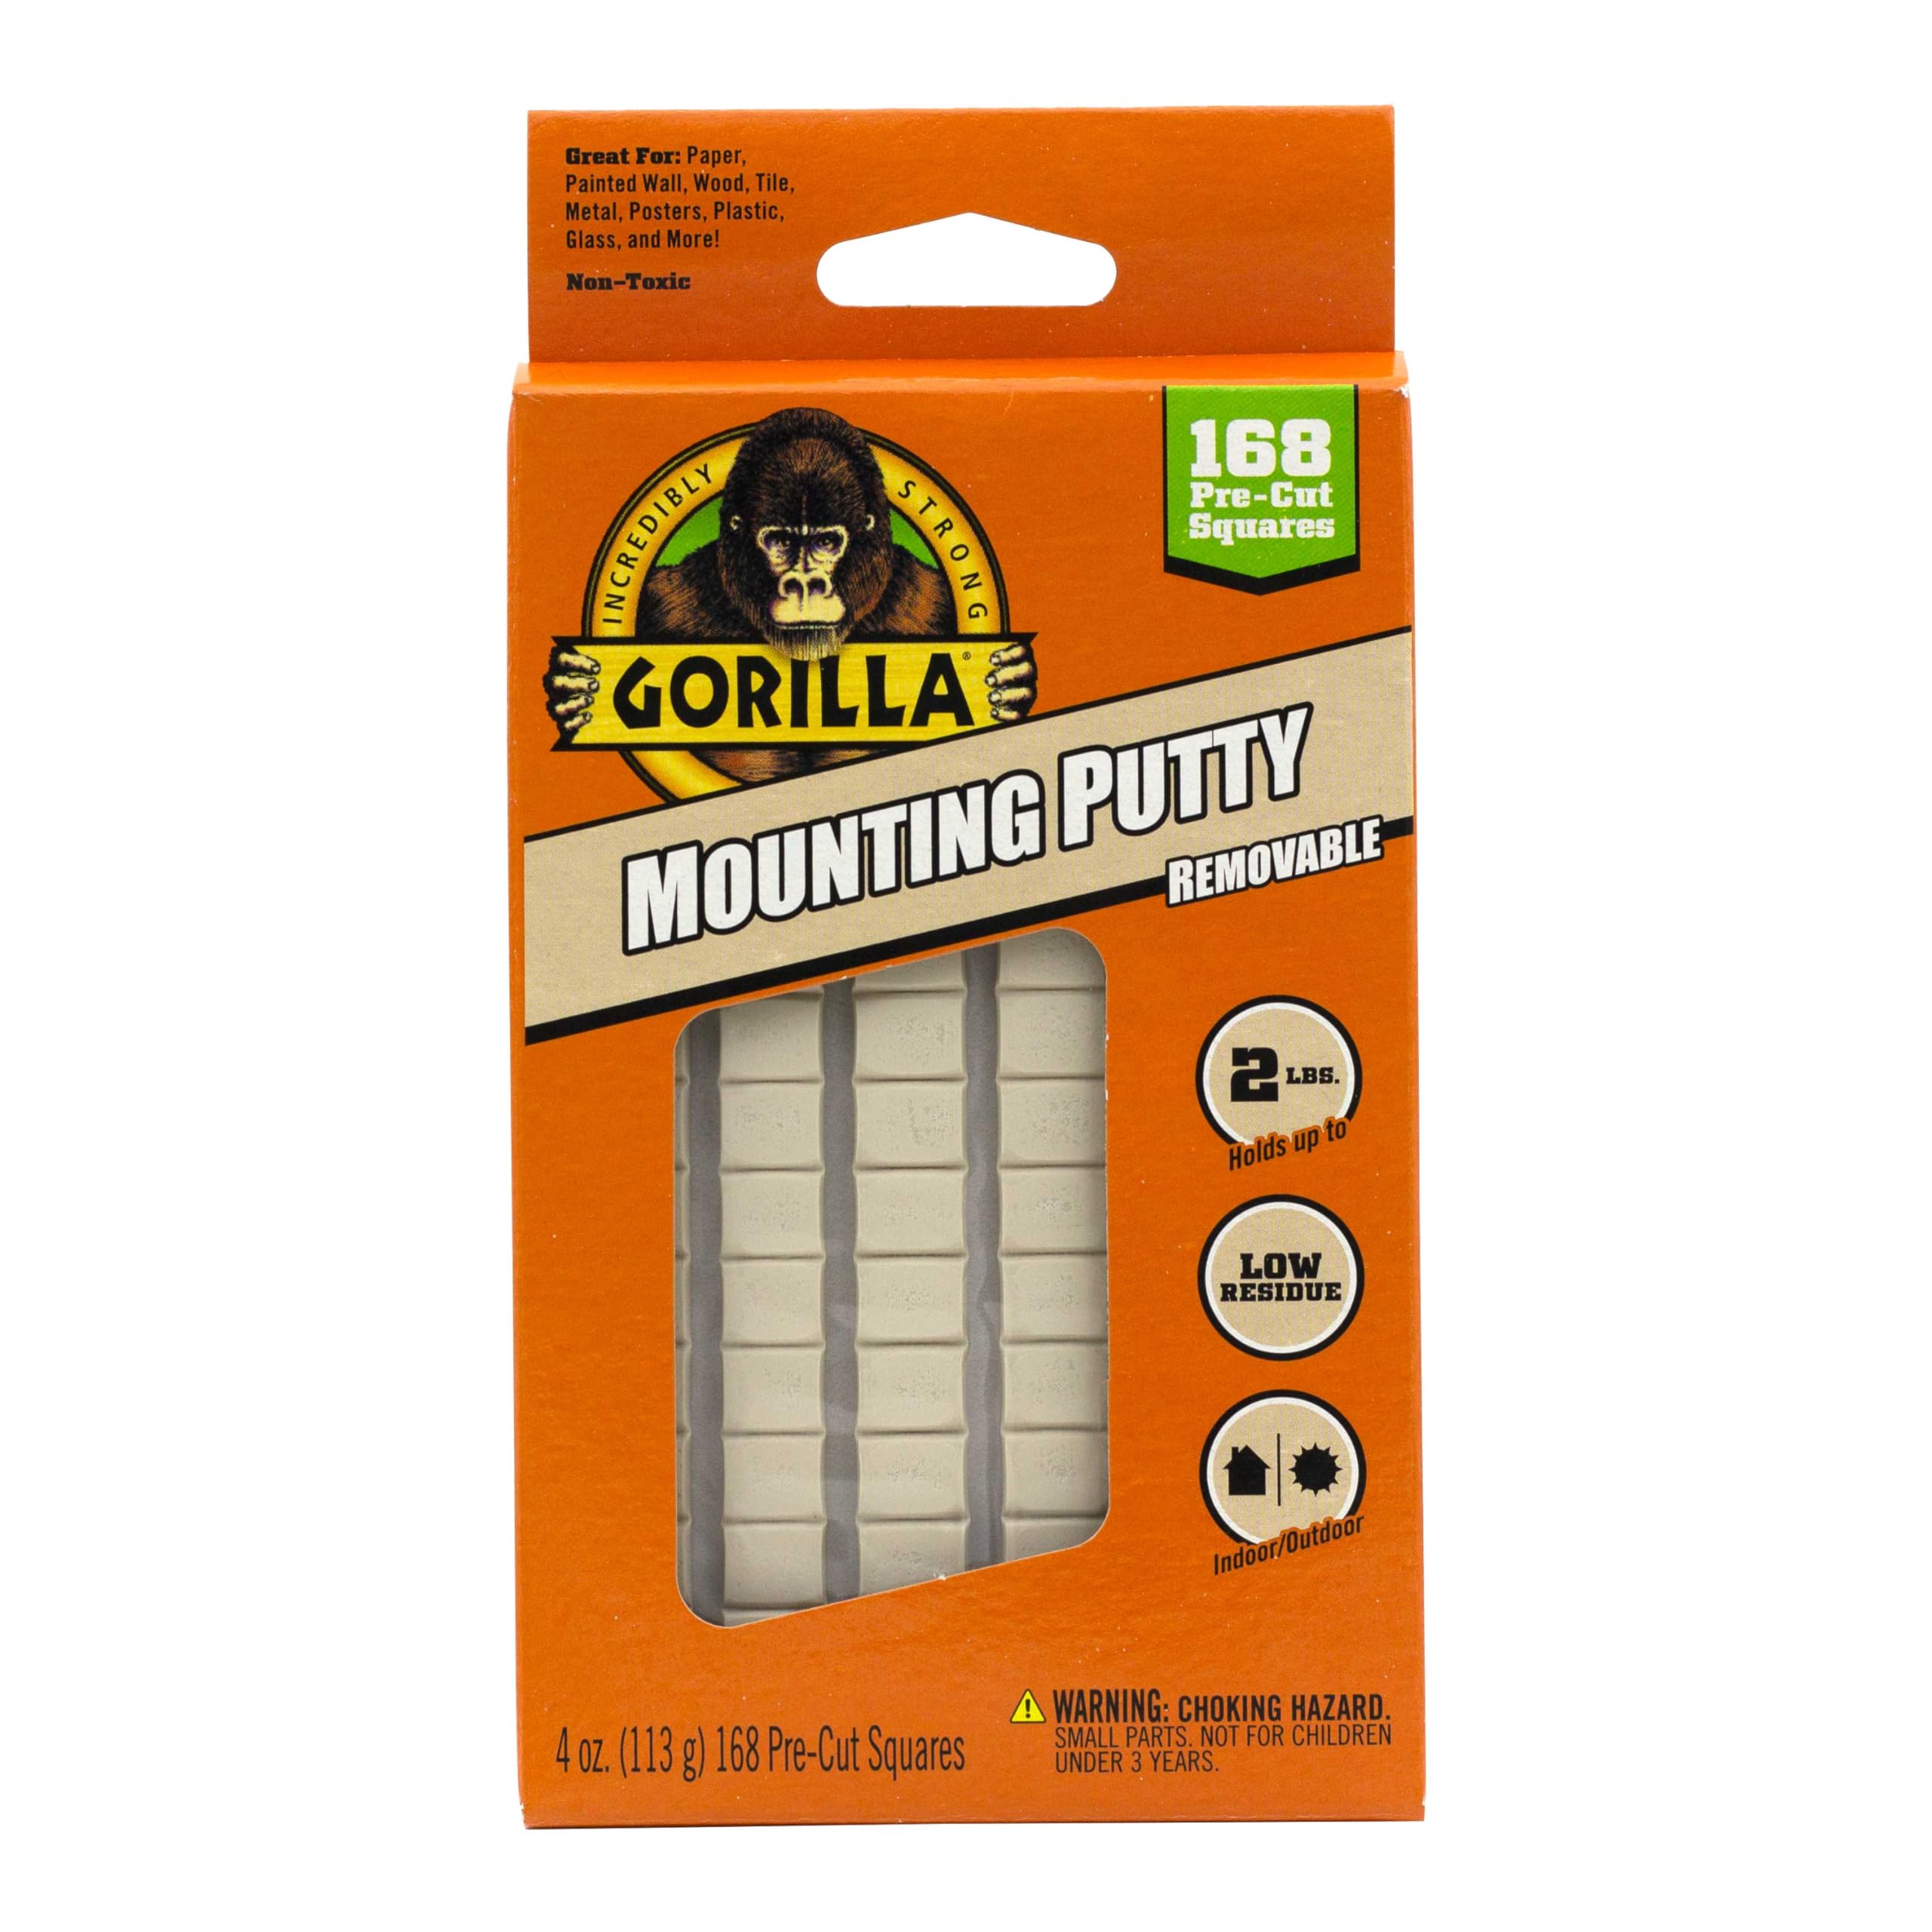 Gorilla Mounting Putty, Non-Toxic Hanging Adhesive, Removeable & Repositionable, 168 Pre-Cut Squares, 4oz/113g, Natural Tan Color, (Pack of 1)